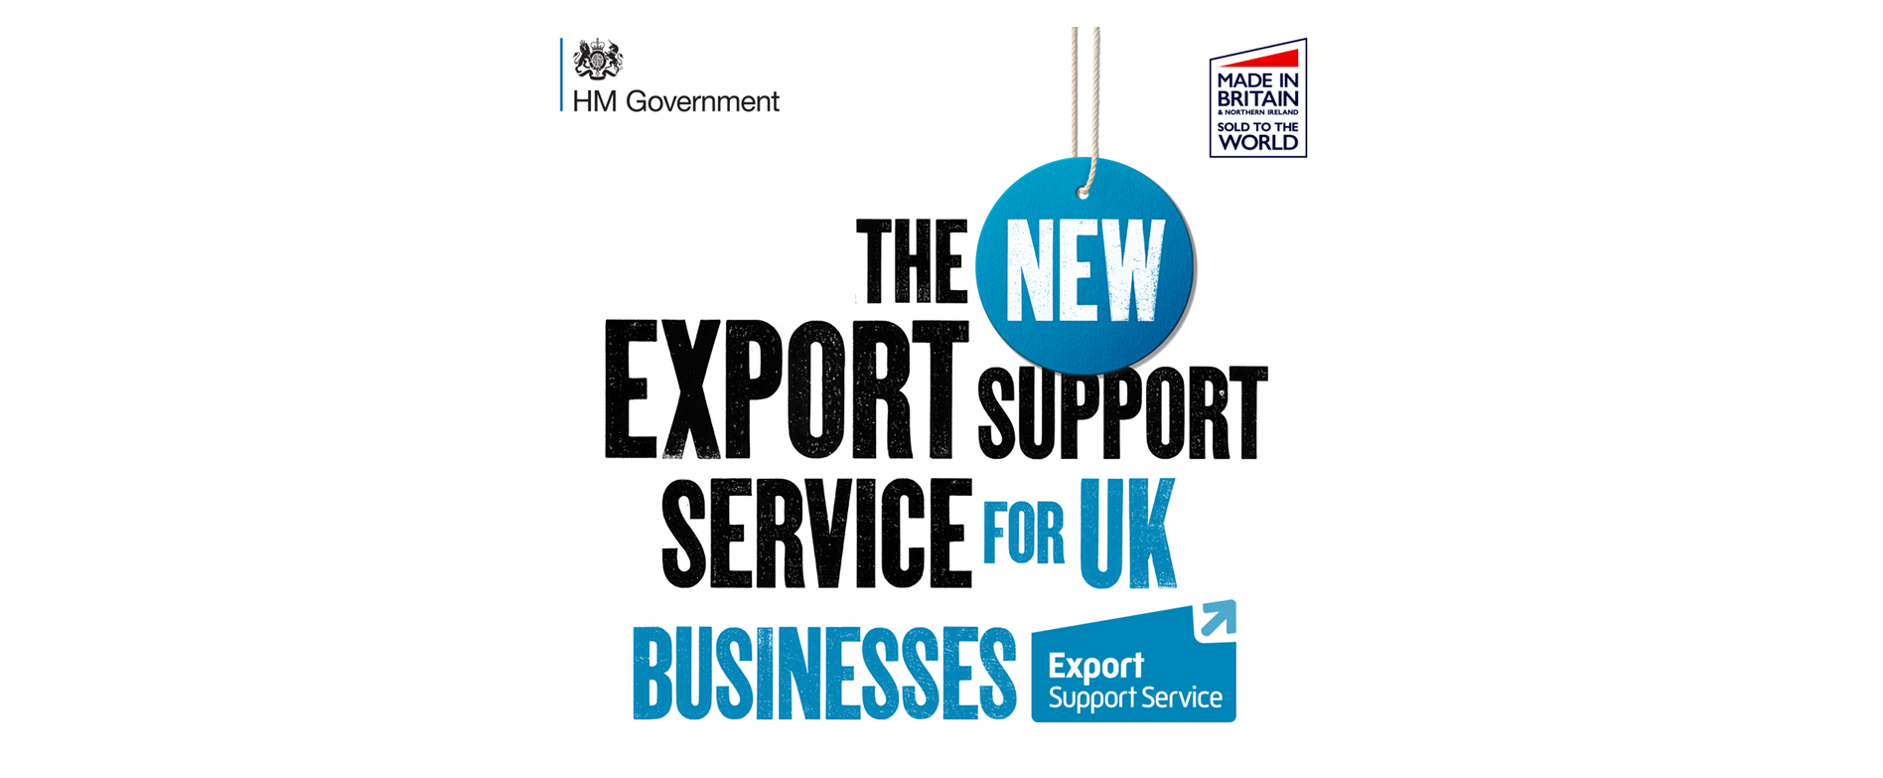 Export Support Service for UK Businesses